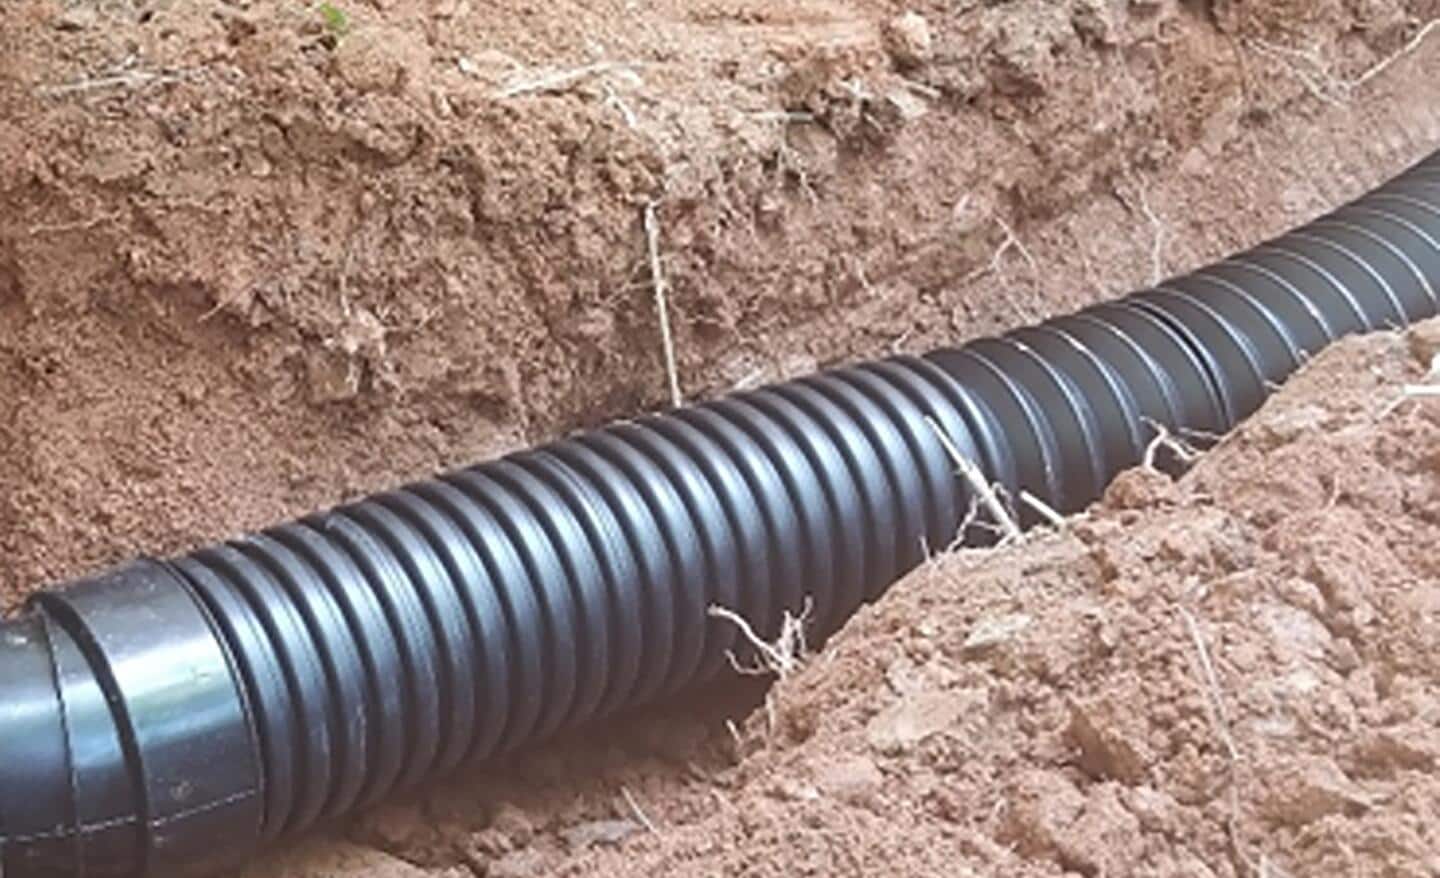 Corrugated drain pipe in a trench.